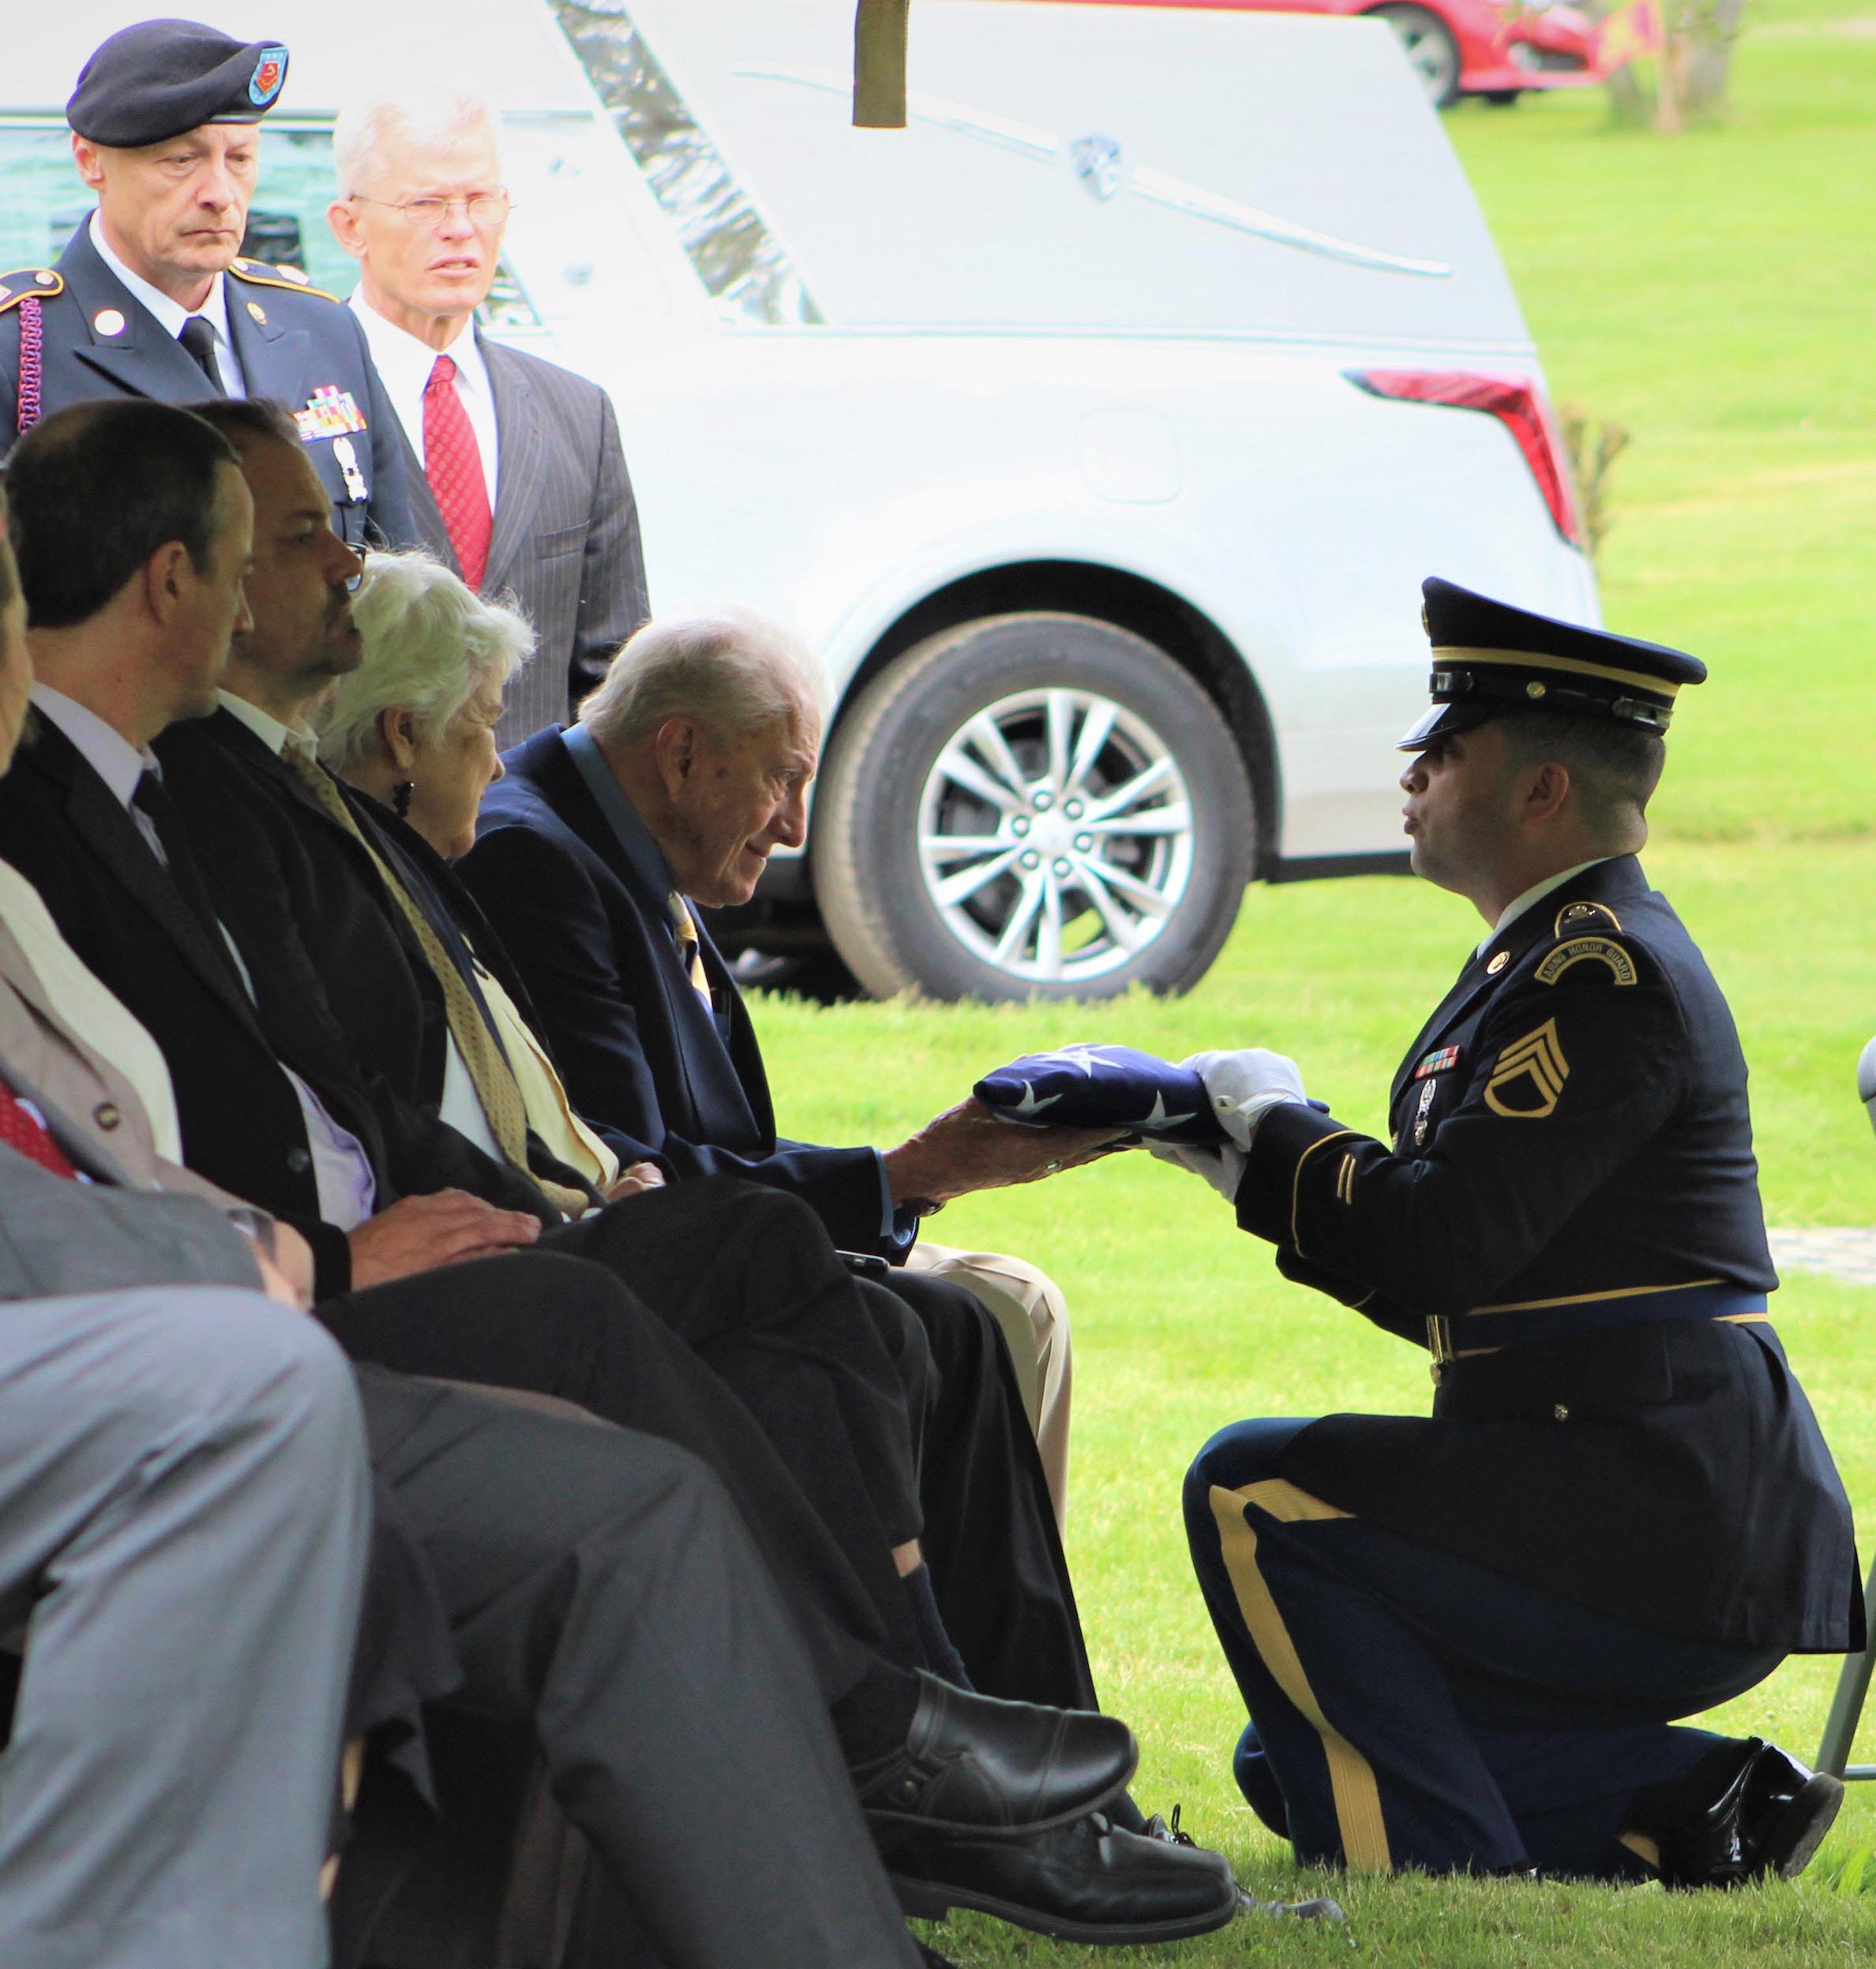 New York Army National Guard Staff Sgt. Natanael Perez presents the American flag to Gloyd `Dean` Kimball, cousin of Korean War MIA Cpl. Robert Charles Agard Jr., on May 27, 2022, at Forest Lawn Memorial Park Cemetery in Elmira. Agard's remains were returned home after more than 70 years listed as missing in action following his death in North Korea. The New York Army National Guard conducted 7,753 military funeral services in 2022. (U.S. Army National Guard photo by 1st Lt. Lauren Warner)